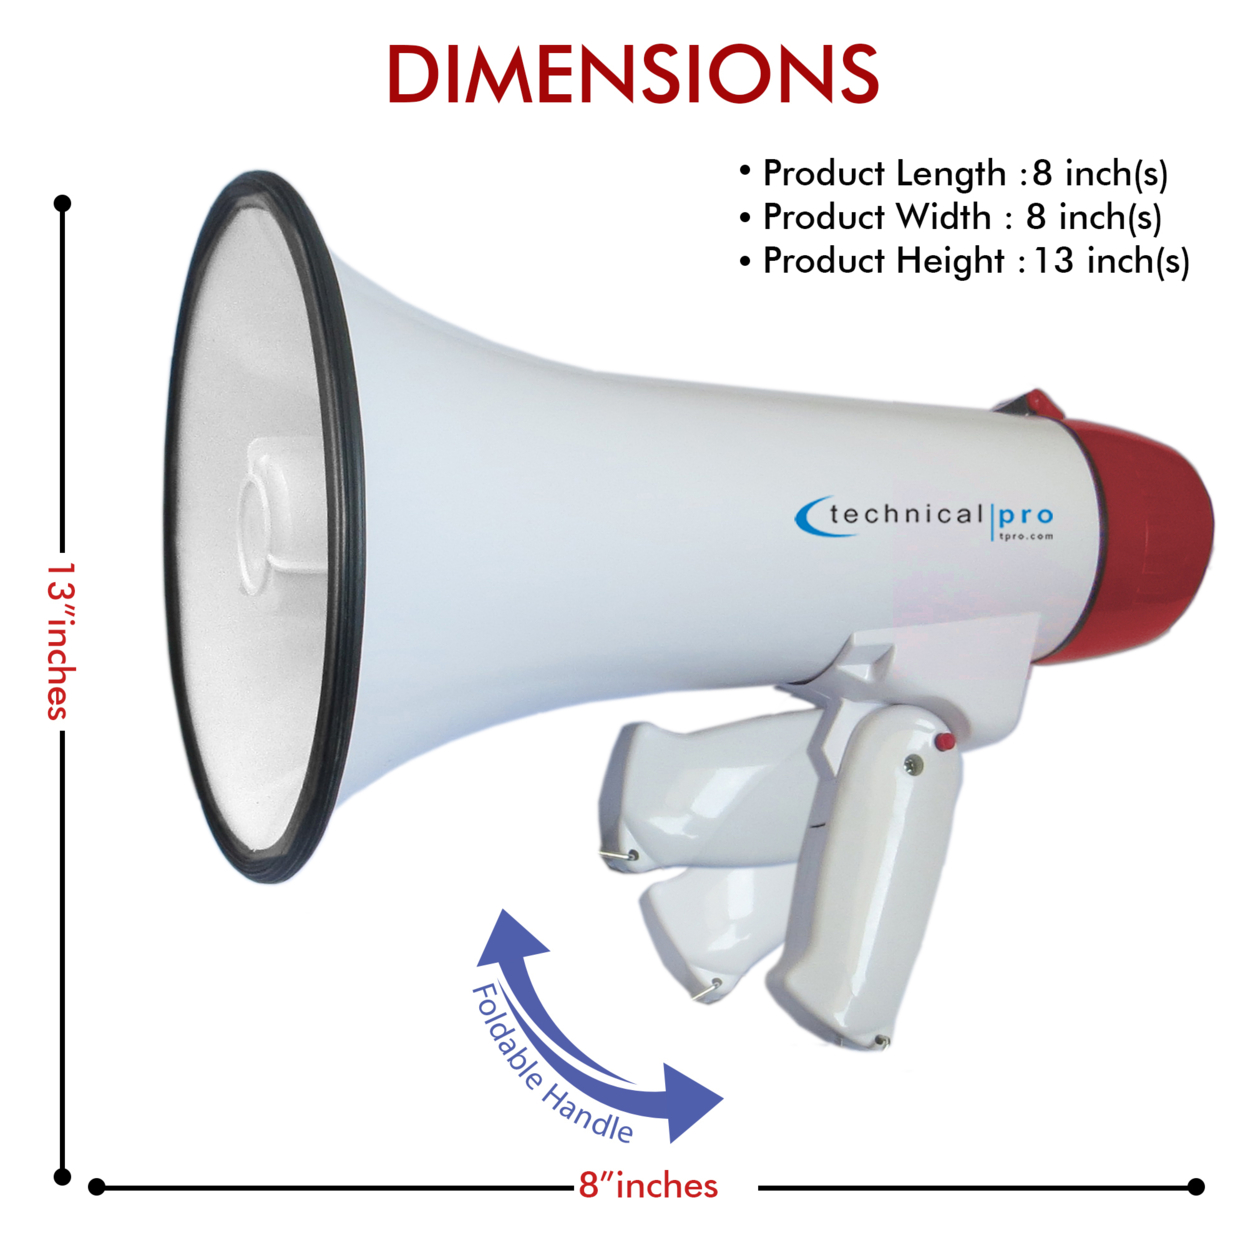 Technical Pro 25 Watts Lightweight 600M Range Portable Megaphone Bullhorn W/ Strap, Siren, And Volume Control, Good For Trainers (Red)